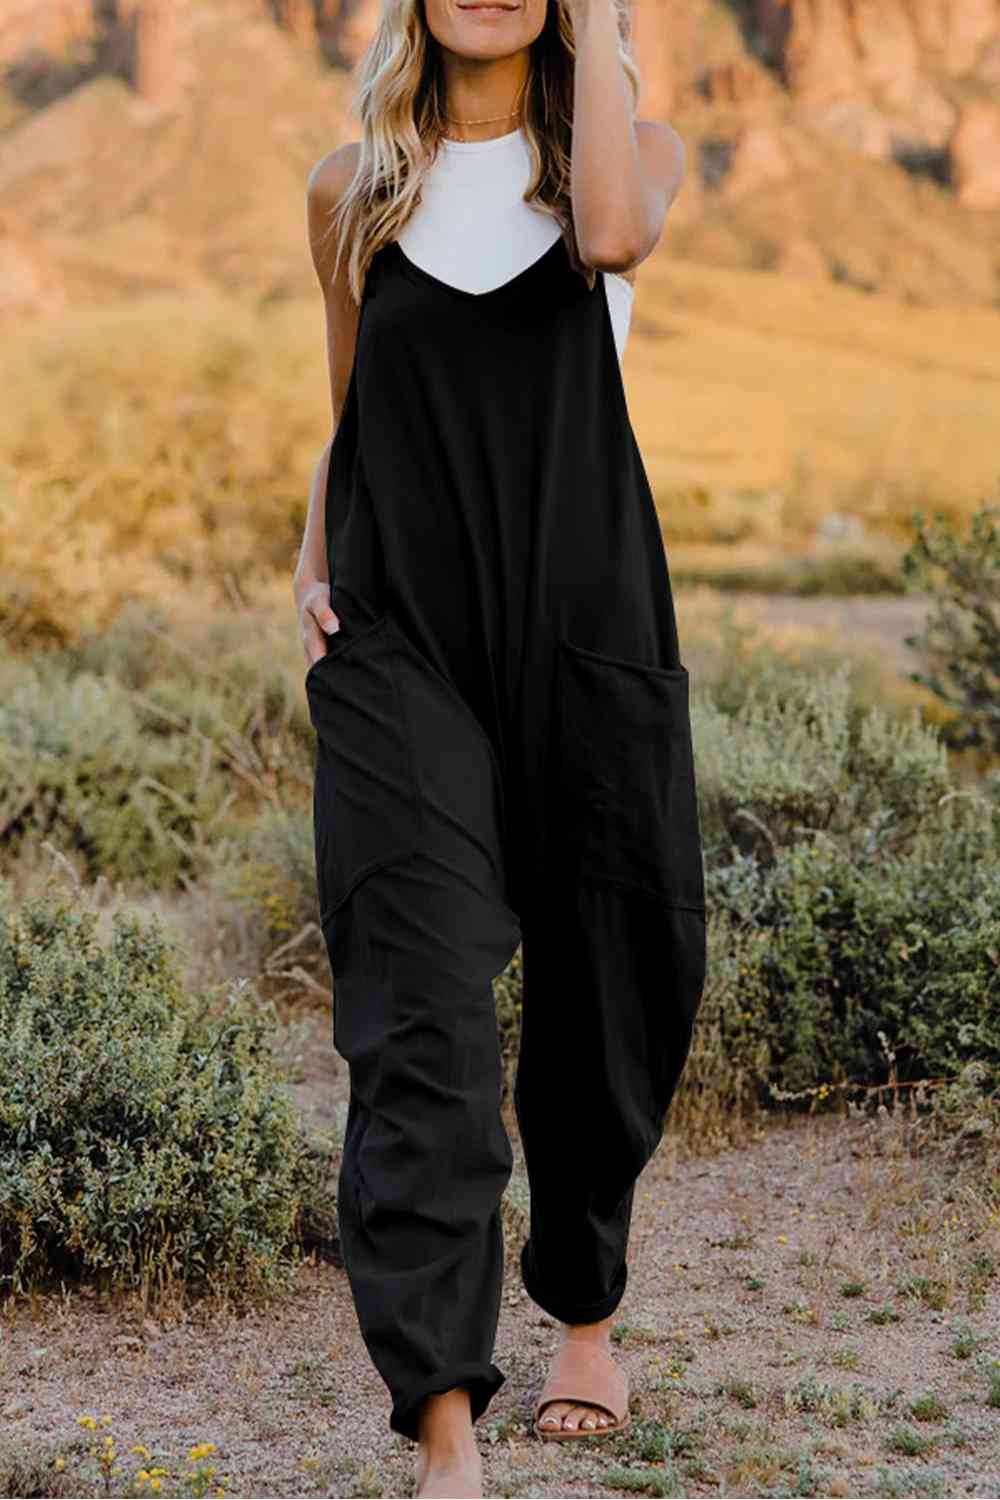 Trendy V-Neck Sleeveless Jumpsuit with Pockets Casual Chic for Women Double Take Design